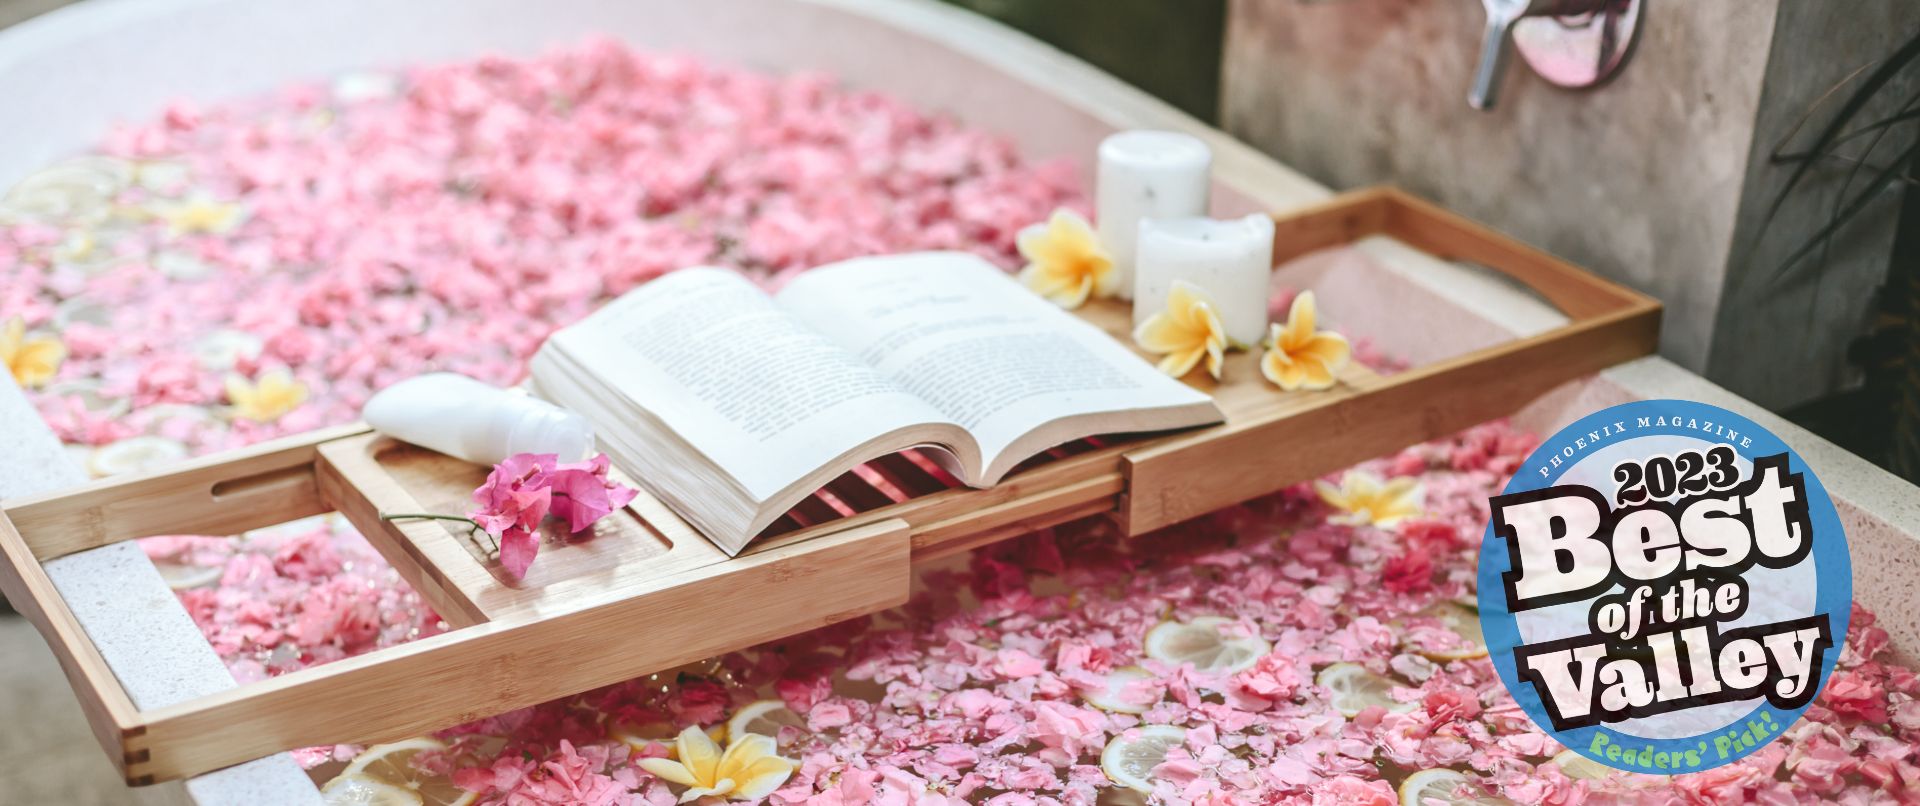 bathtub full of flower petals with a book bench across the tub